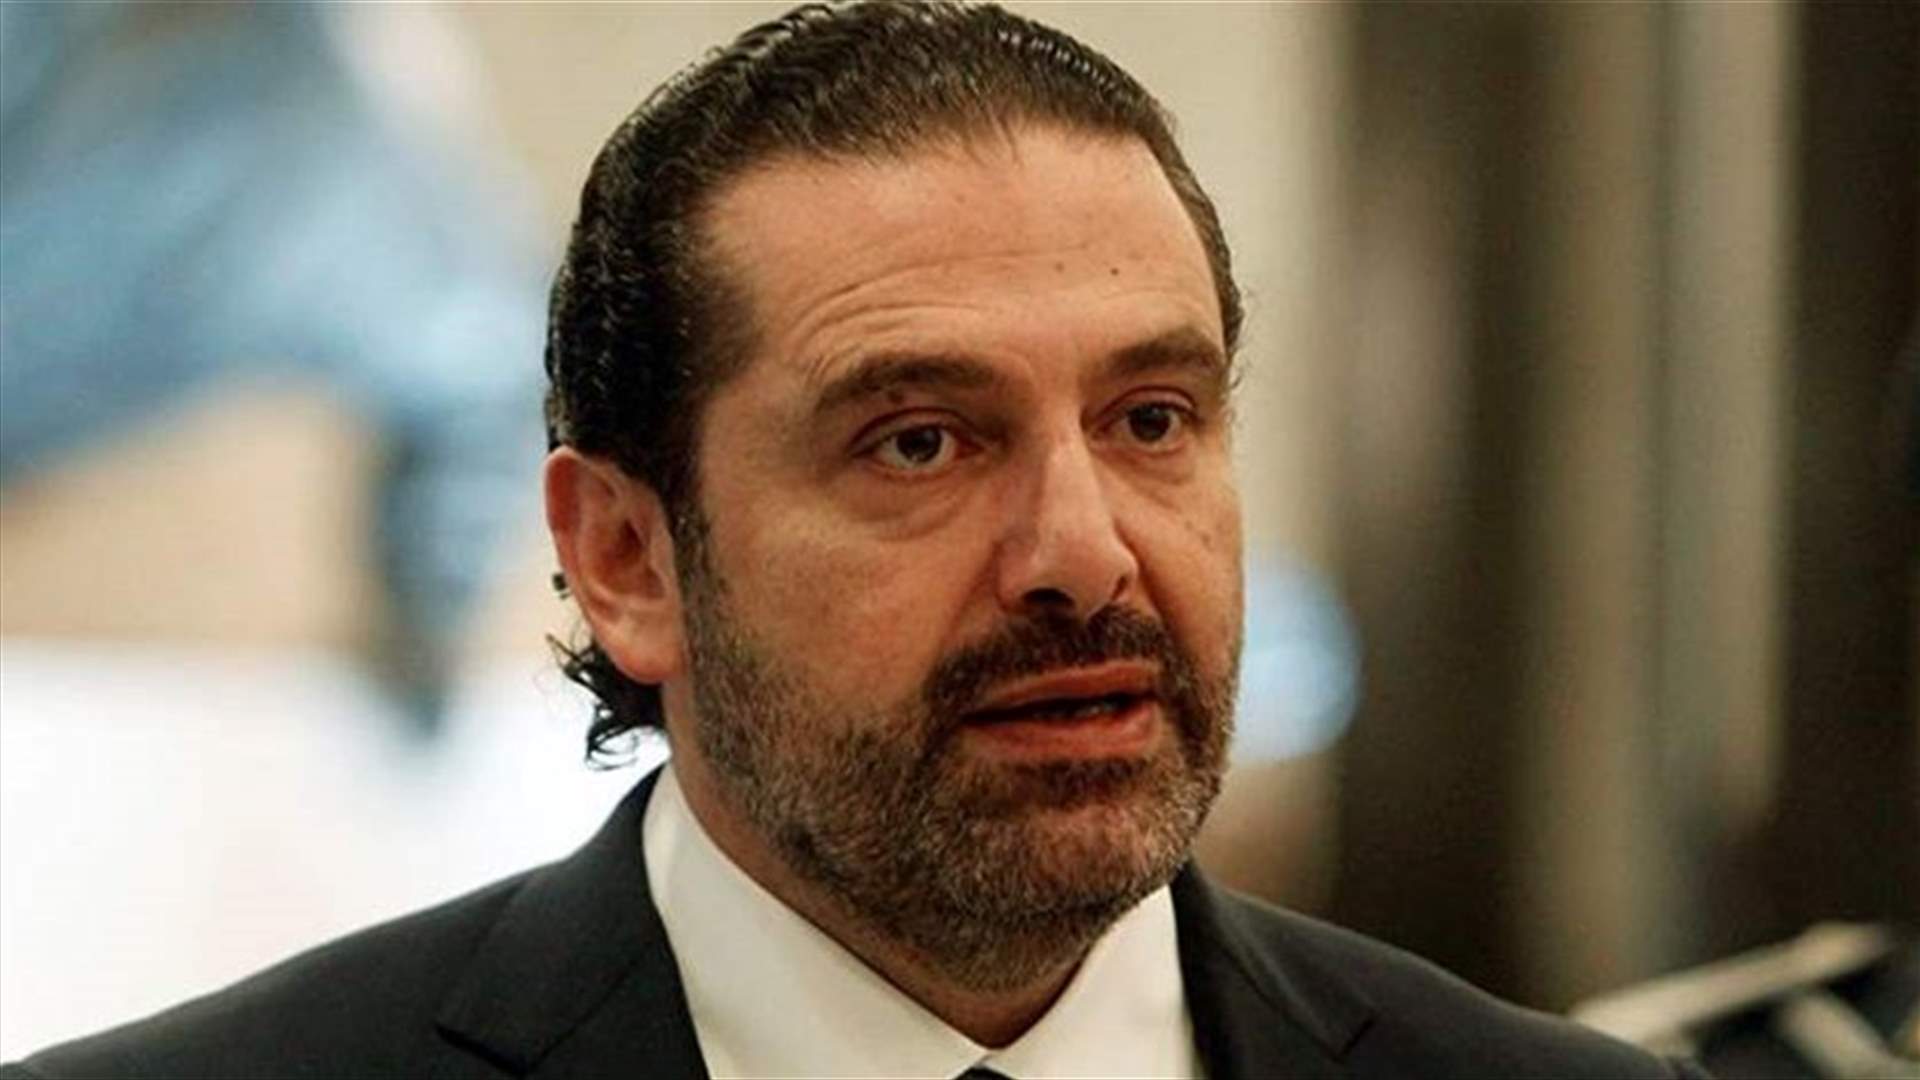 PM Hariri receives phone call from US Pompeo after latest developments